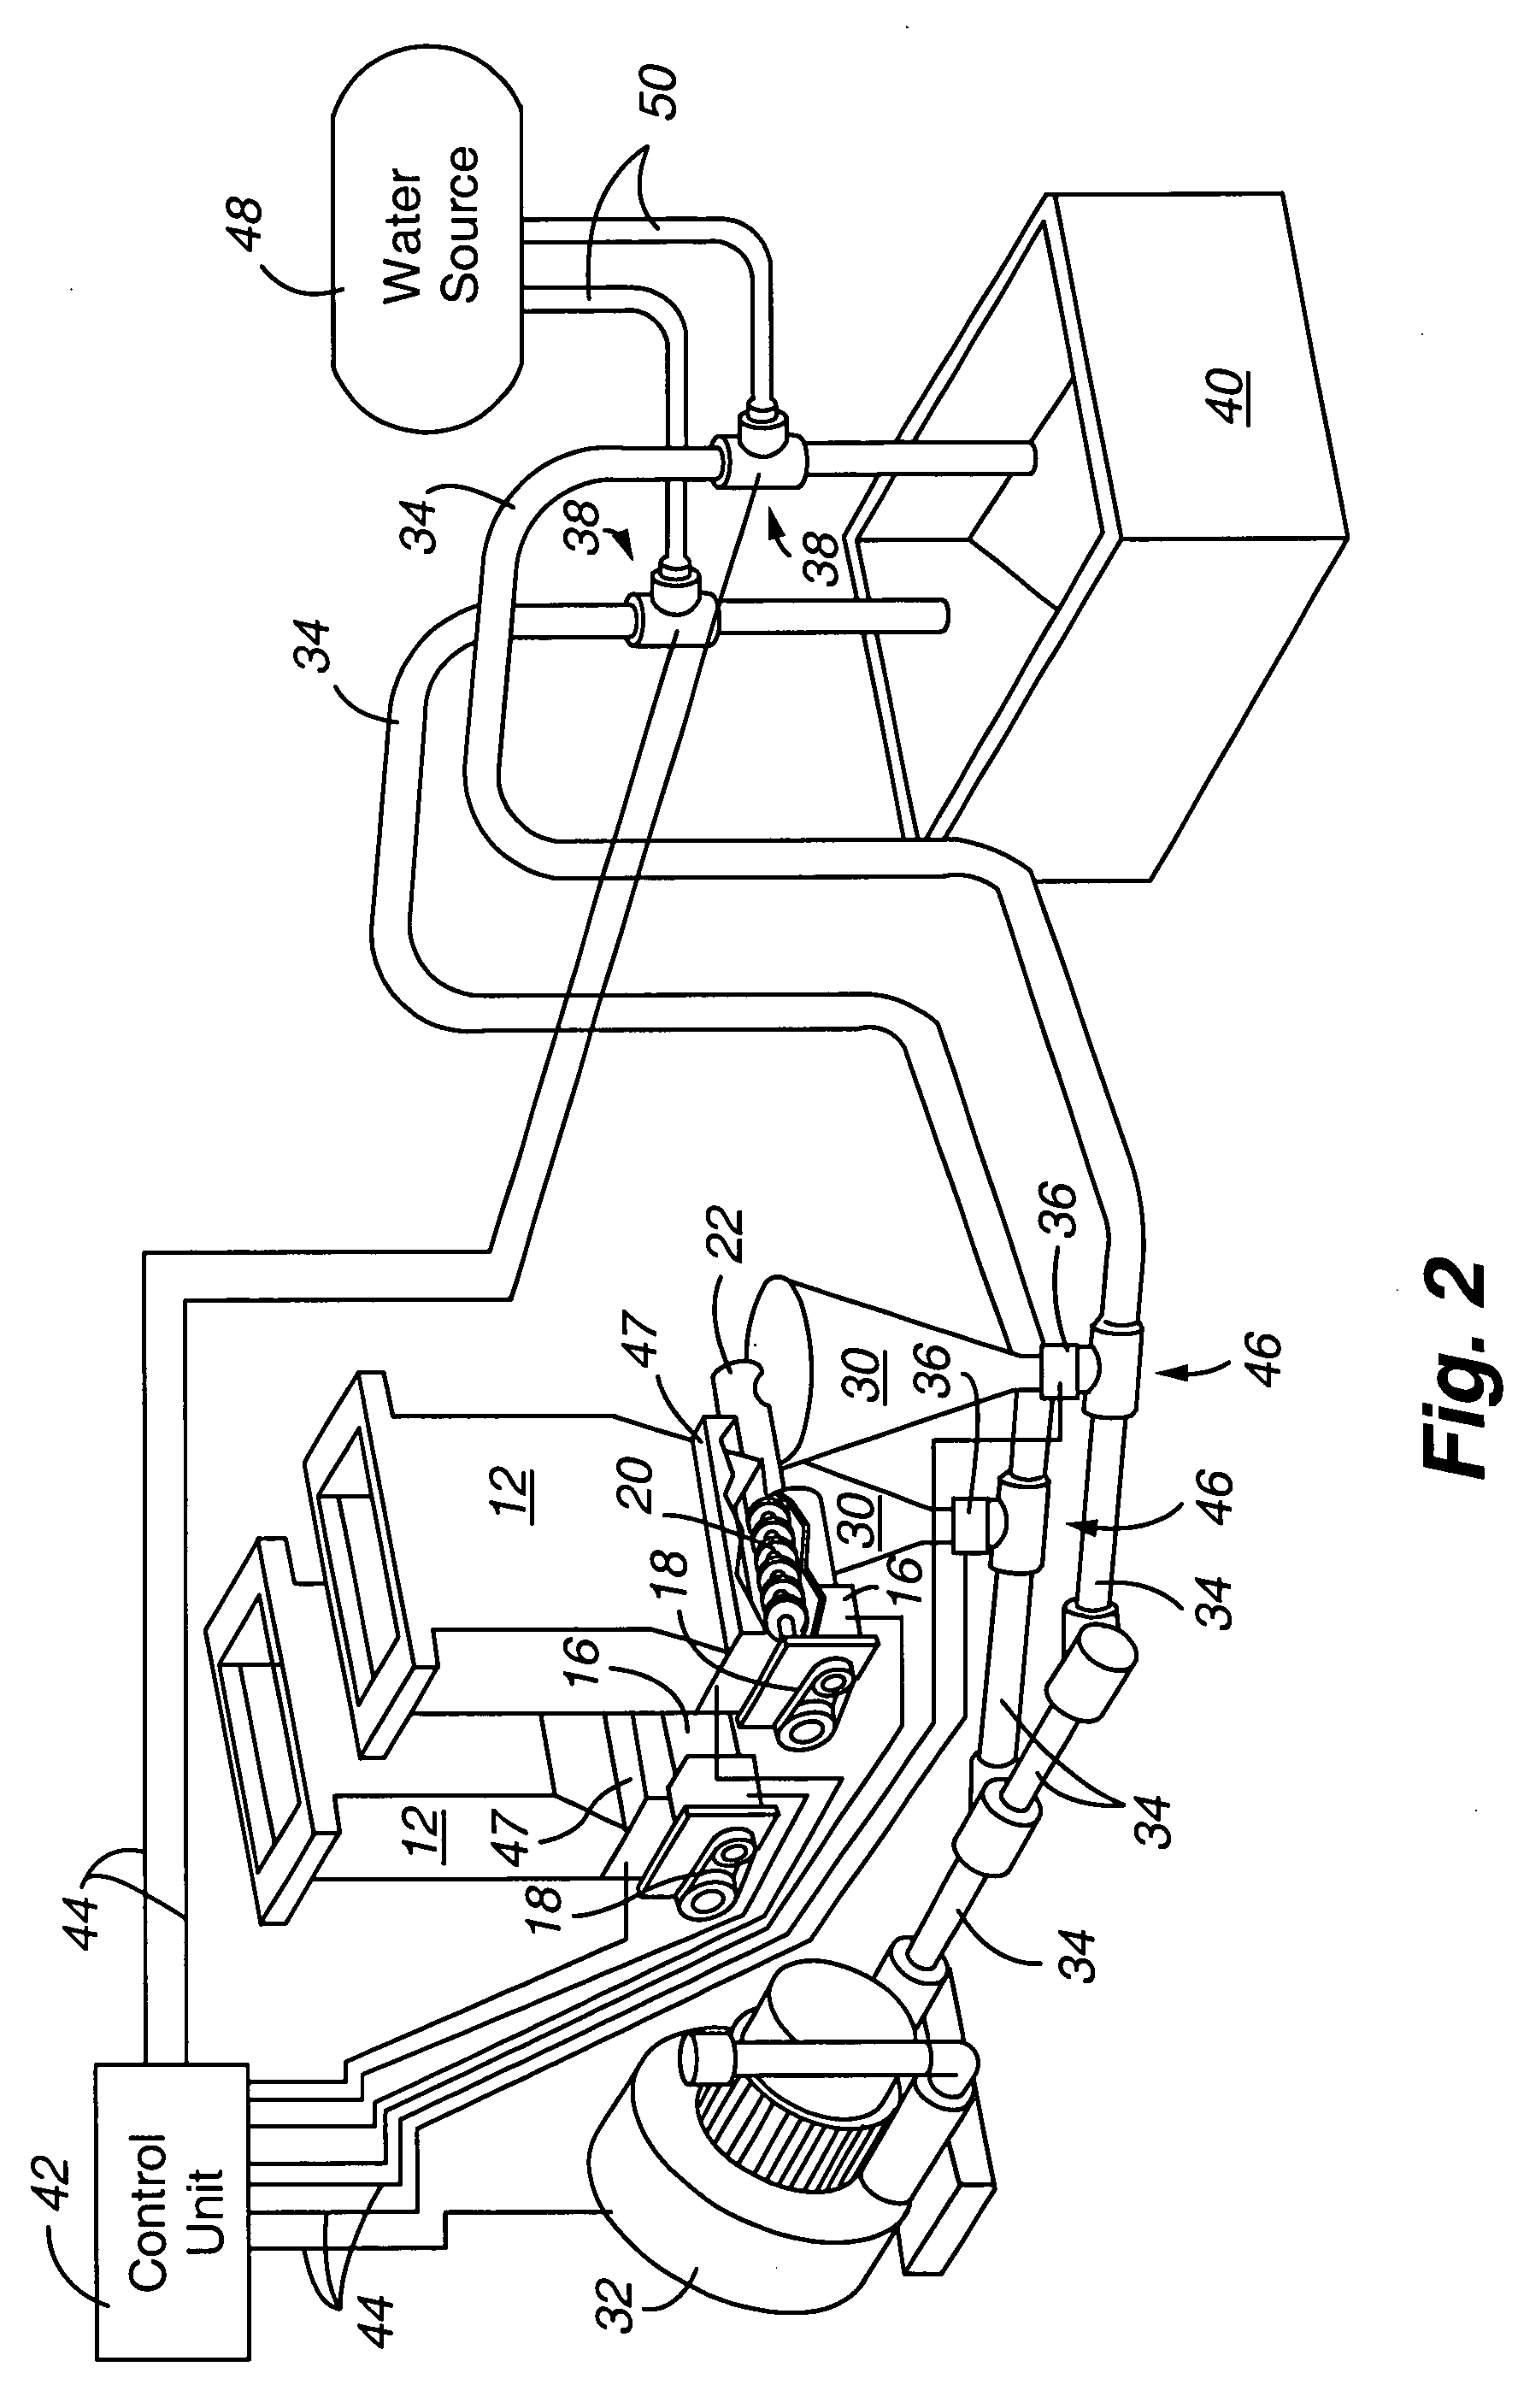 Method and apparatus for administering micro-ingredient feed additives to animal feed rations